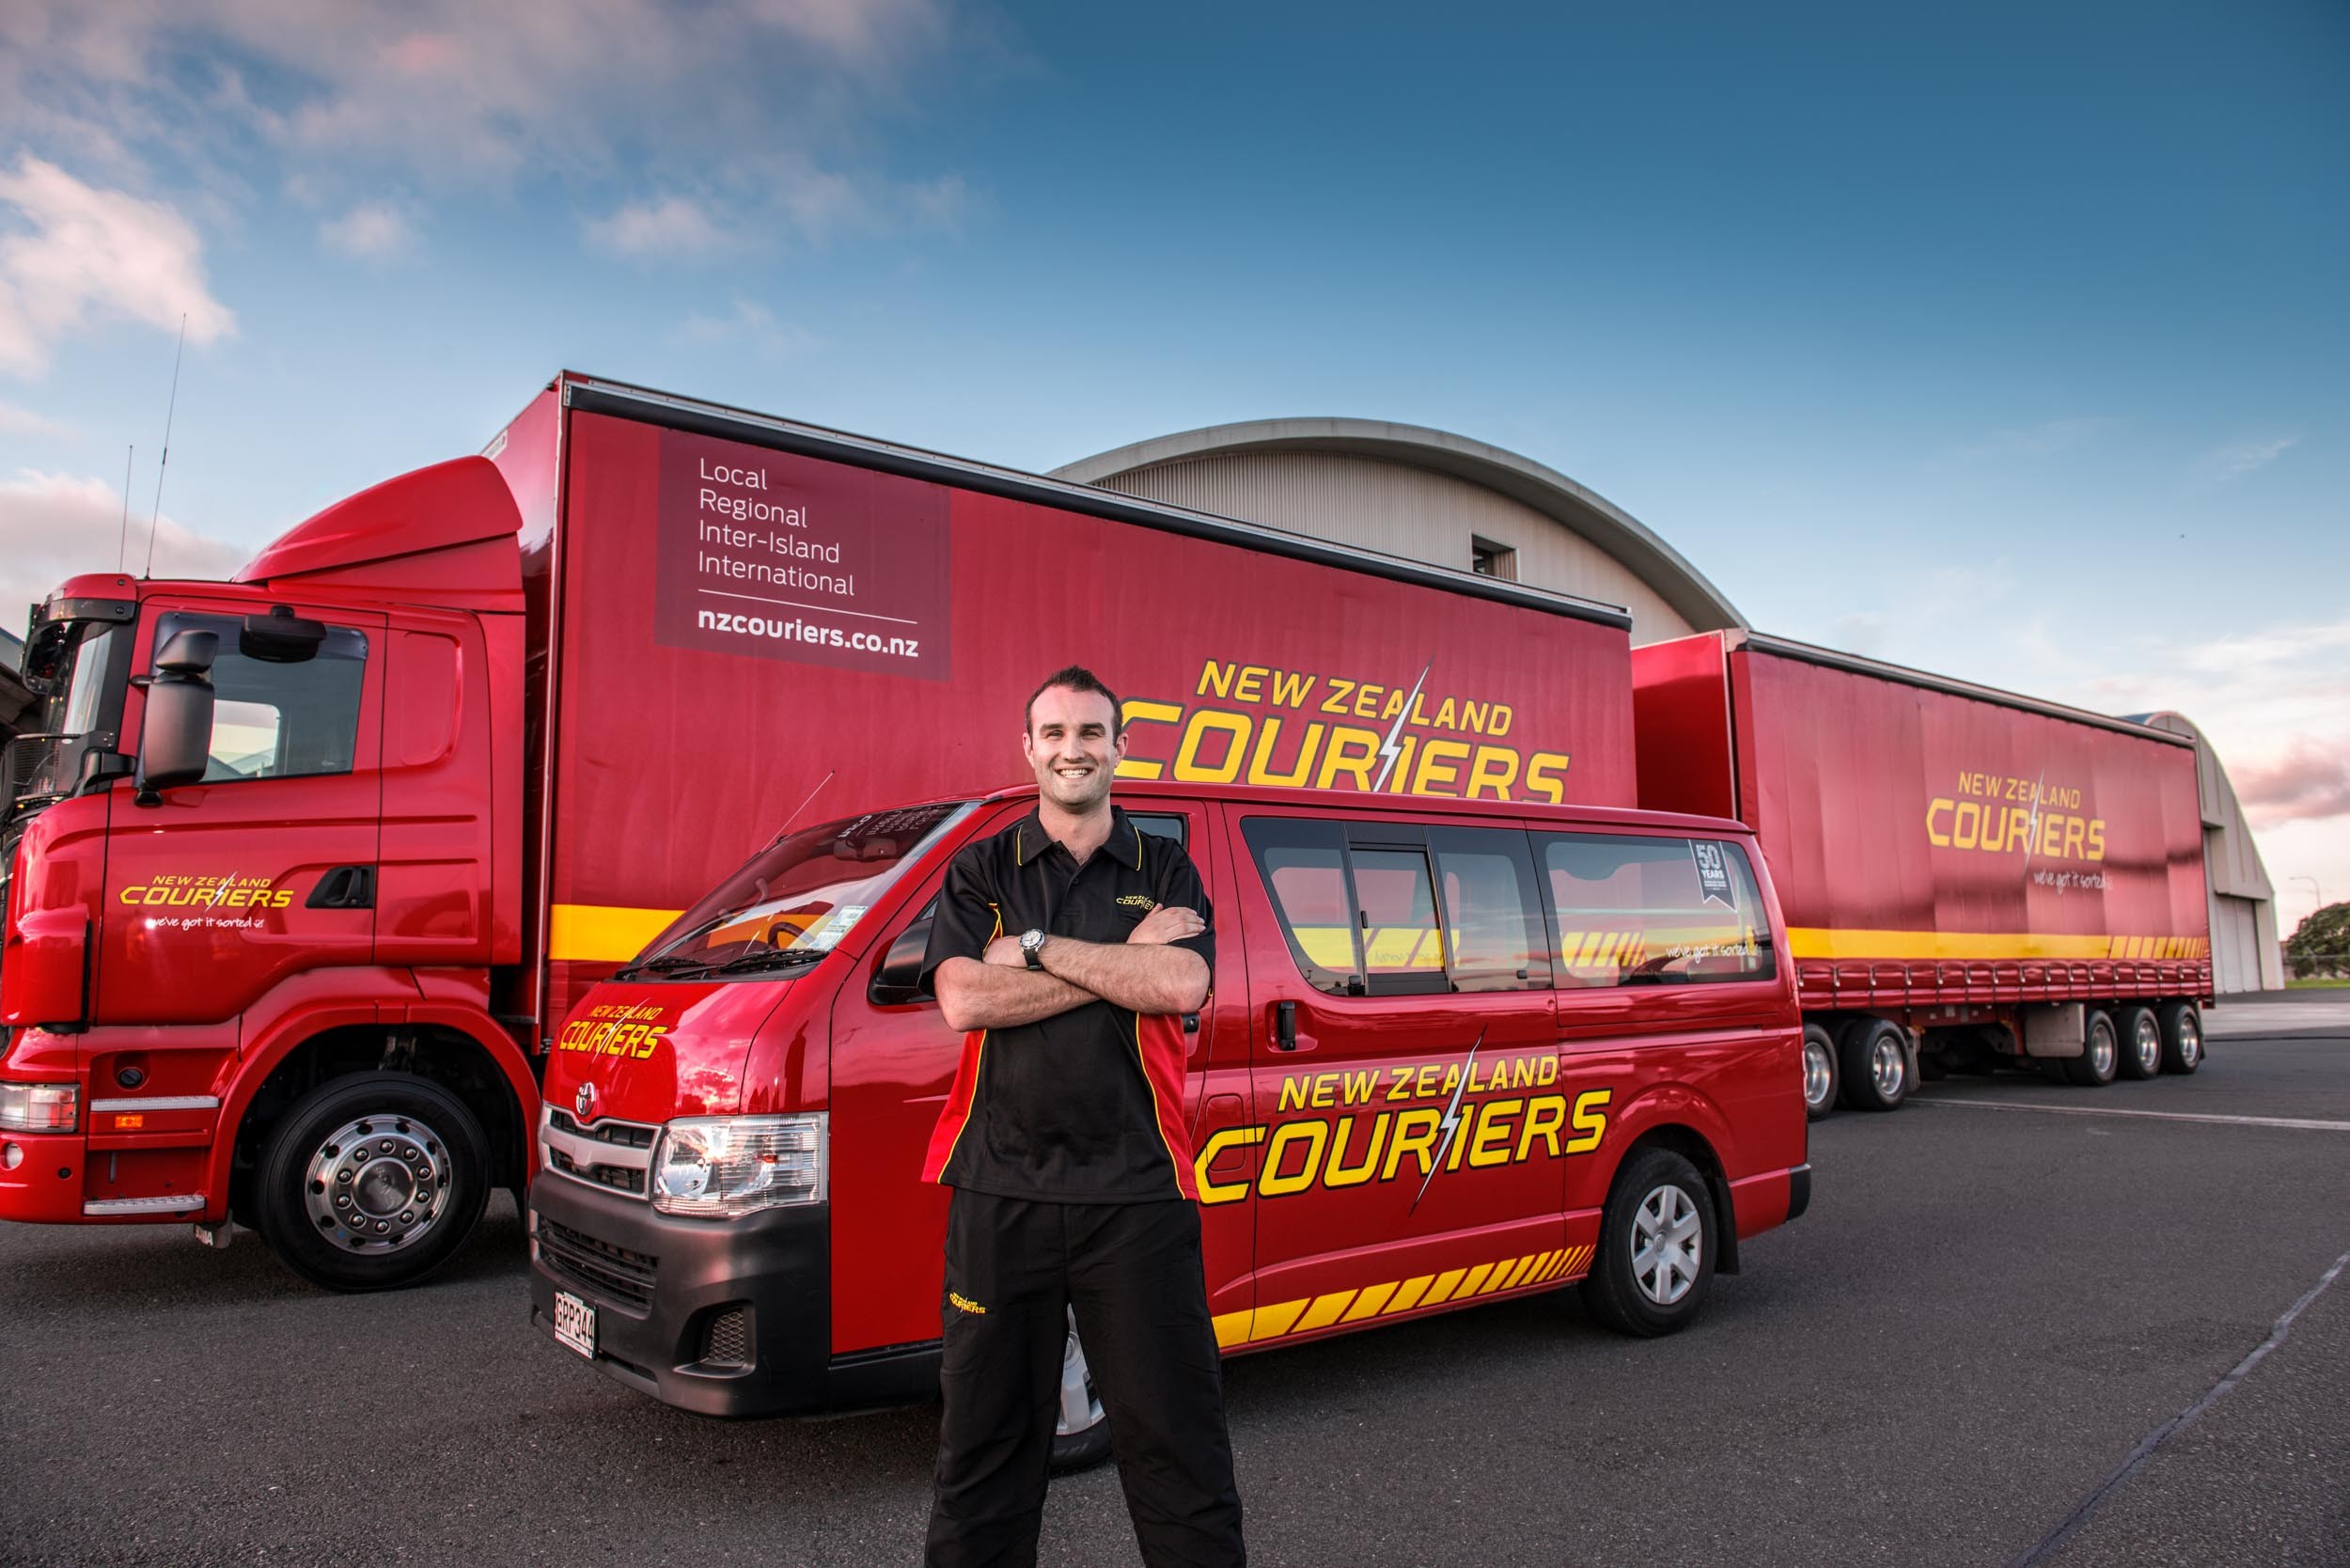 New Zealand Couriers Vehicles